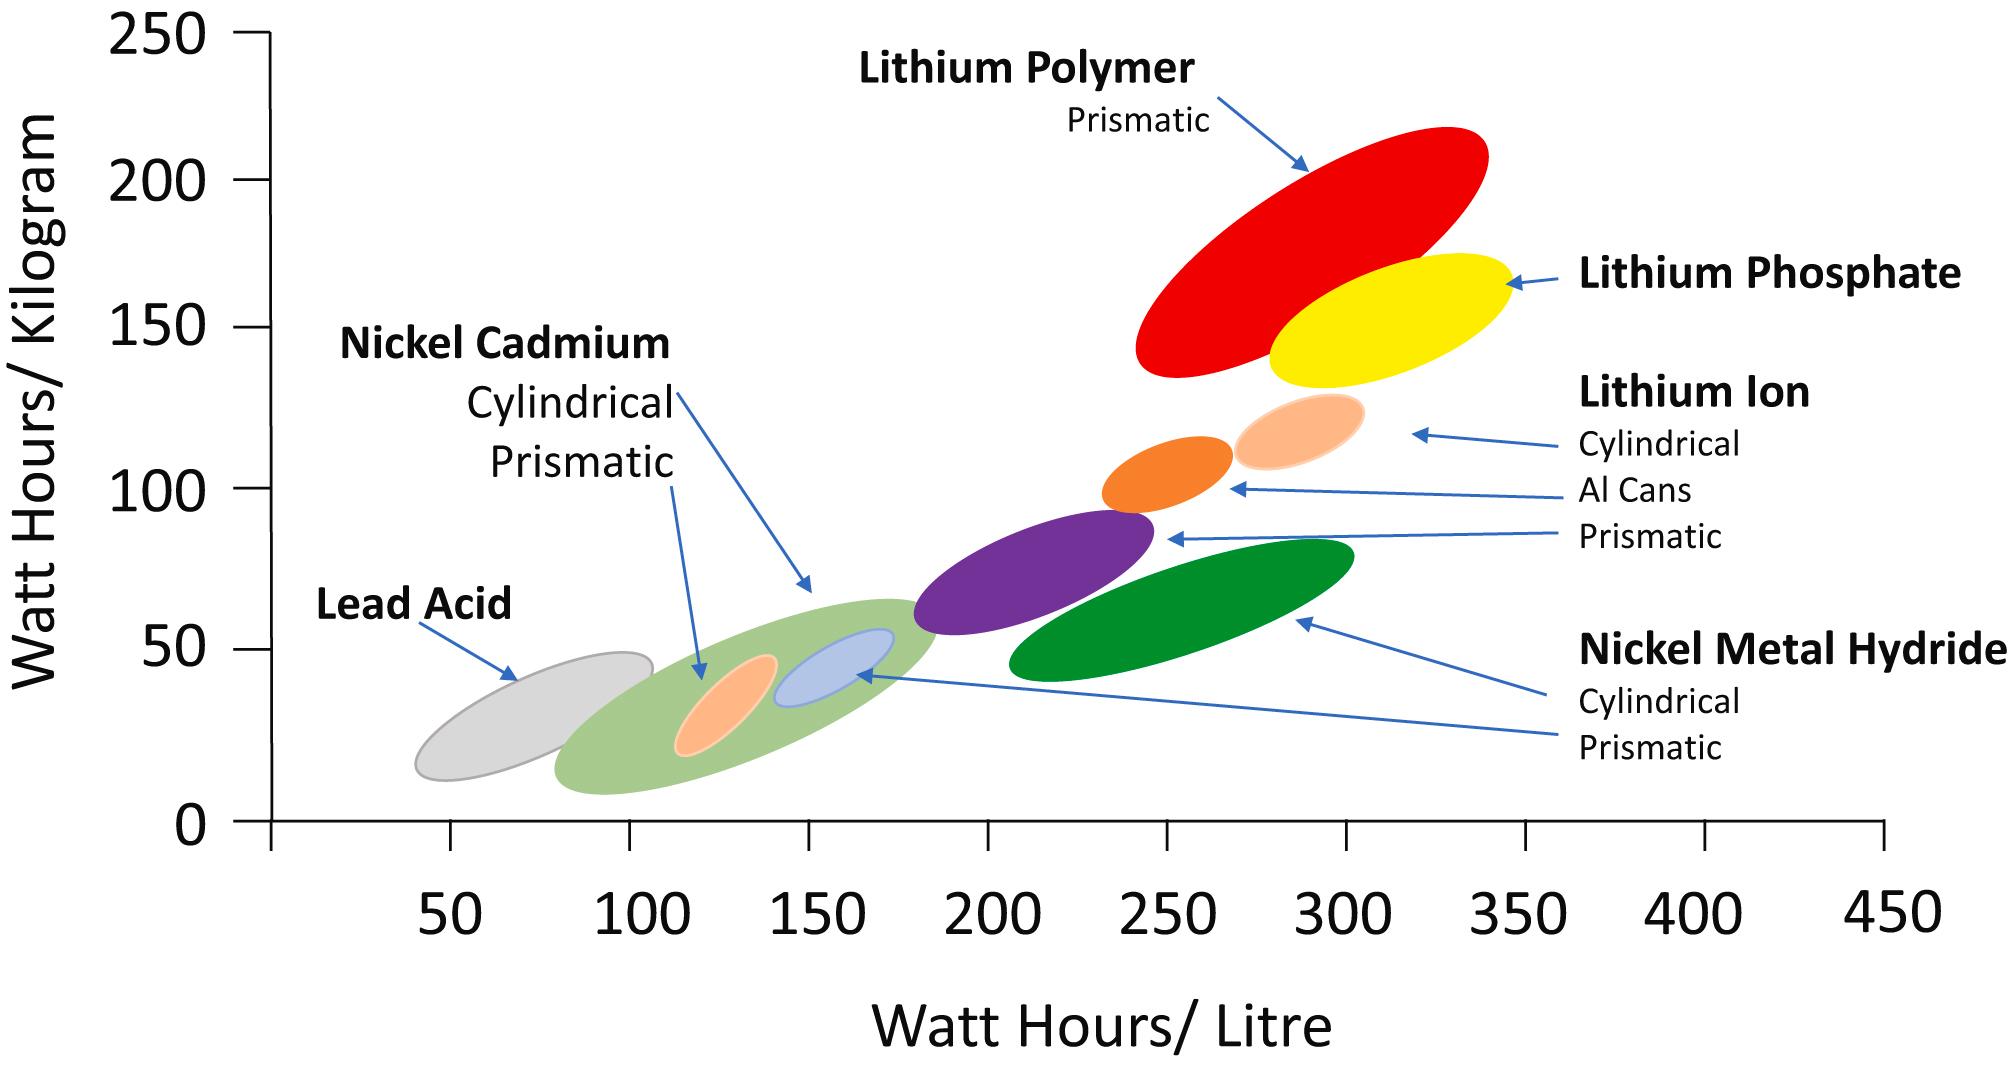 Figure 10.4, The volumetric and gravimetric energy densities of various battery chemistries. Cylindrical cells as the name implies are cylindrical “jelly roll” construction batteries and prismatic cells are constructed to conform to a rectangular shape .